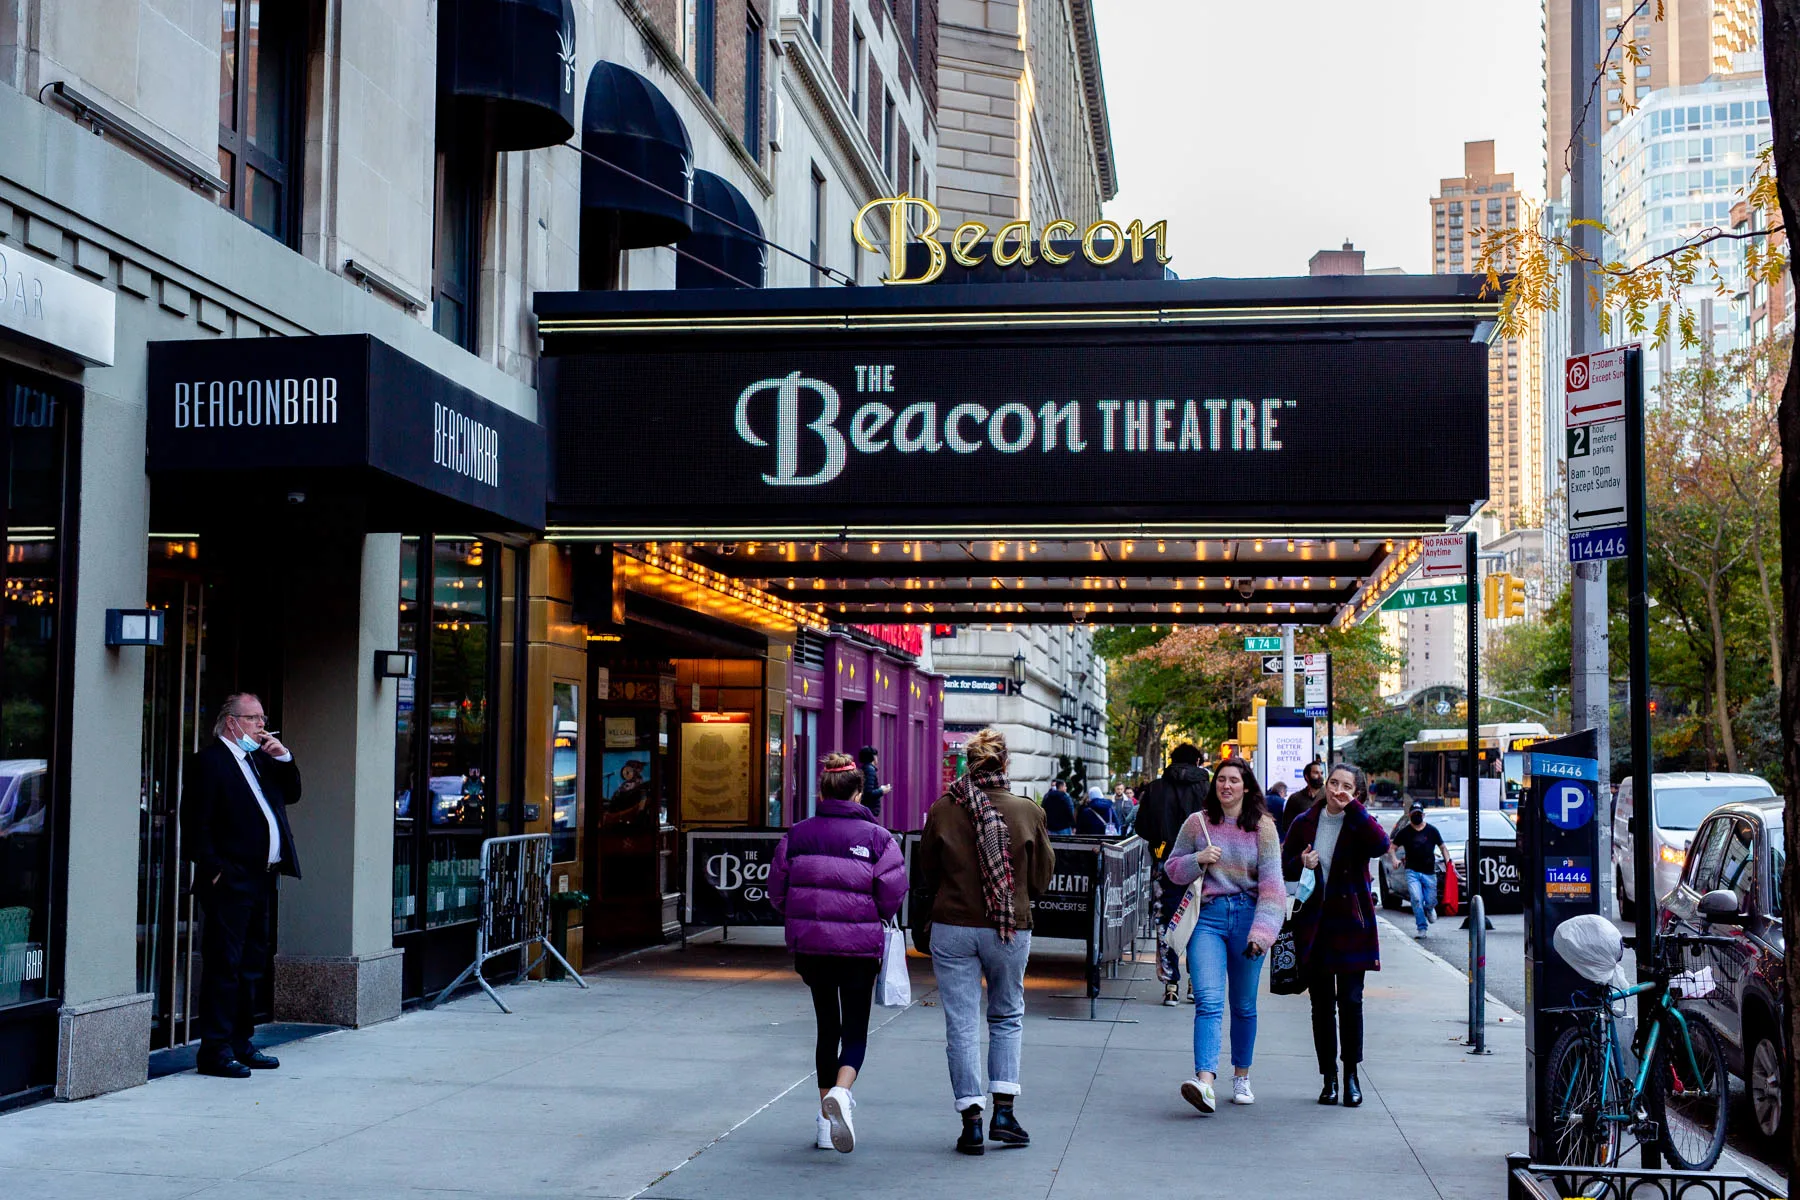 Beacon Theatre NYC
Things to do in January in New York City 